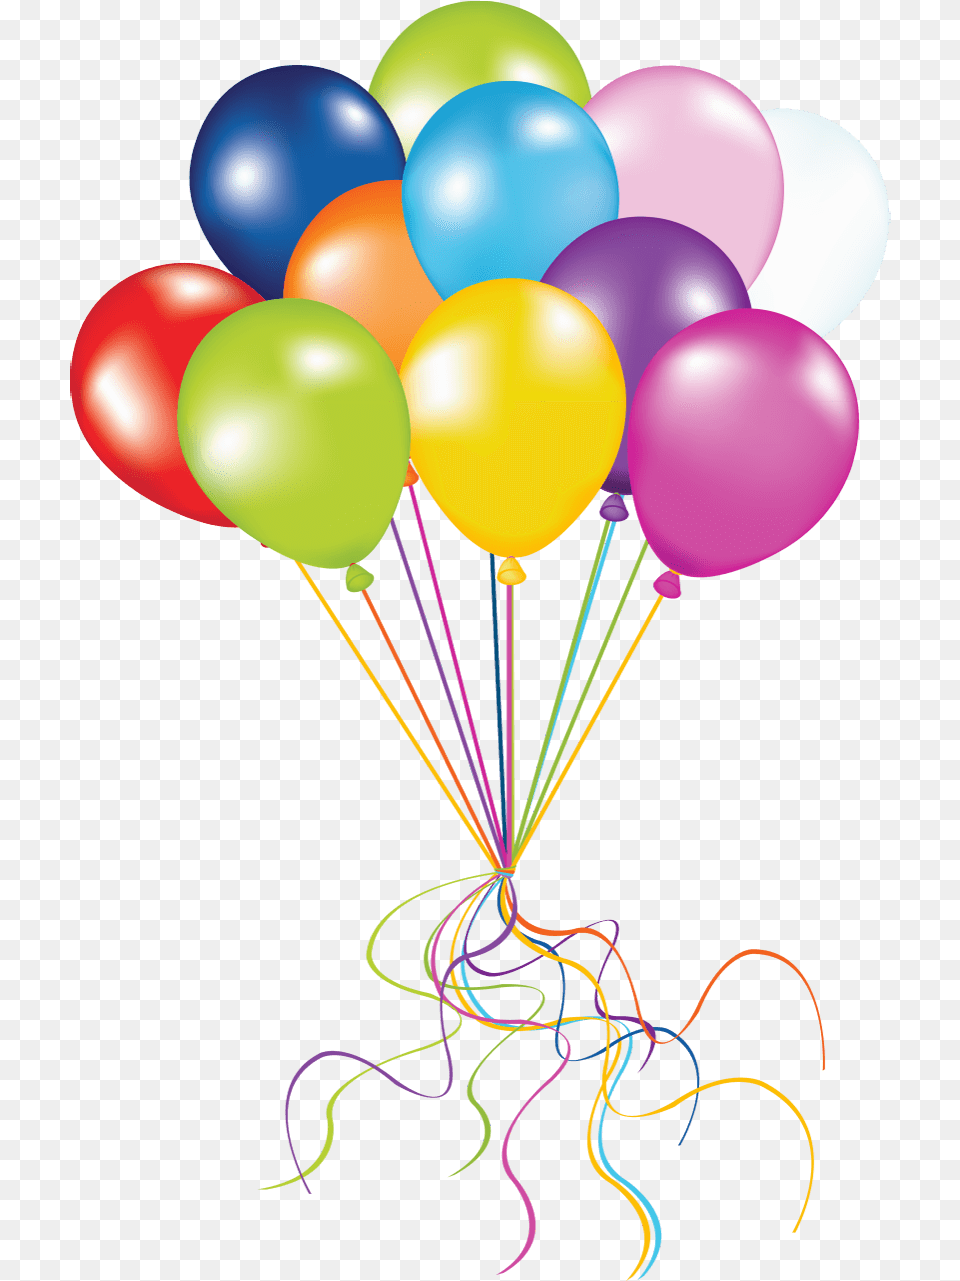 Download Globos Balloon Picture For Free Transparent Background Balloons Png Image